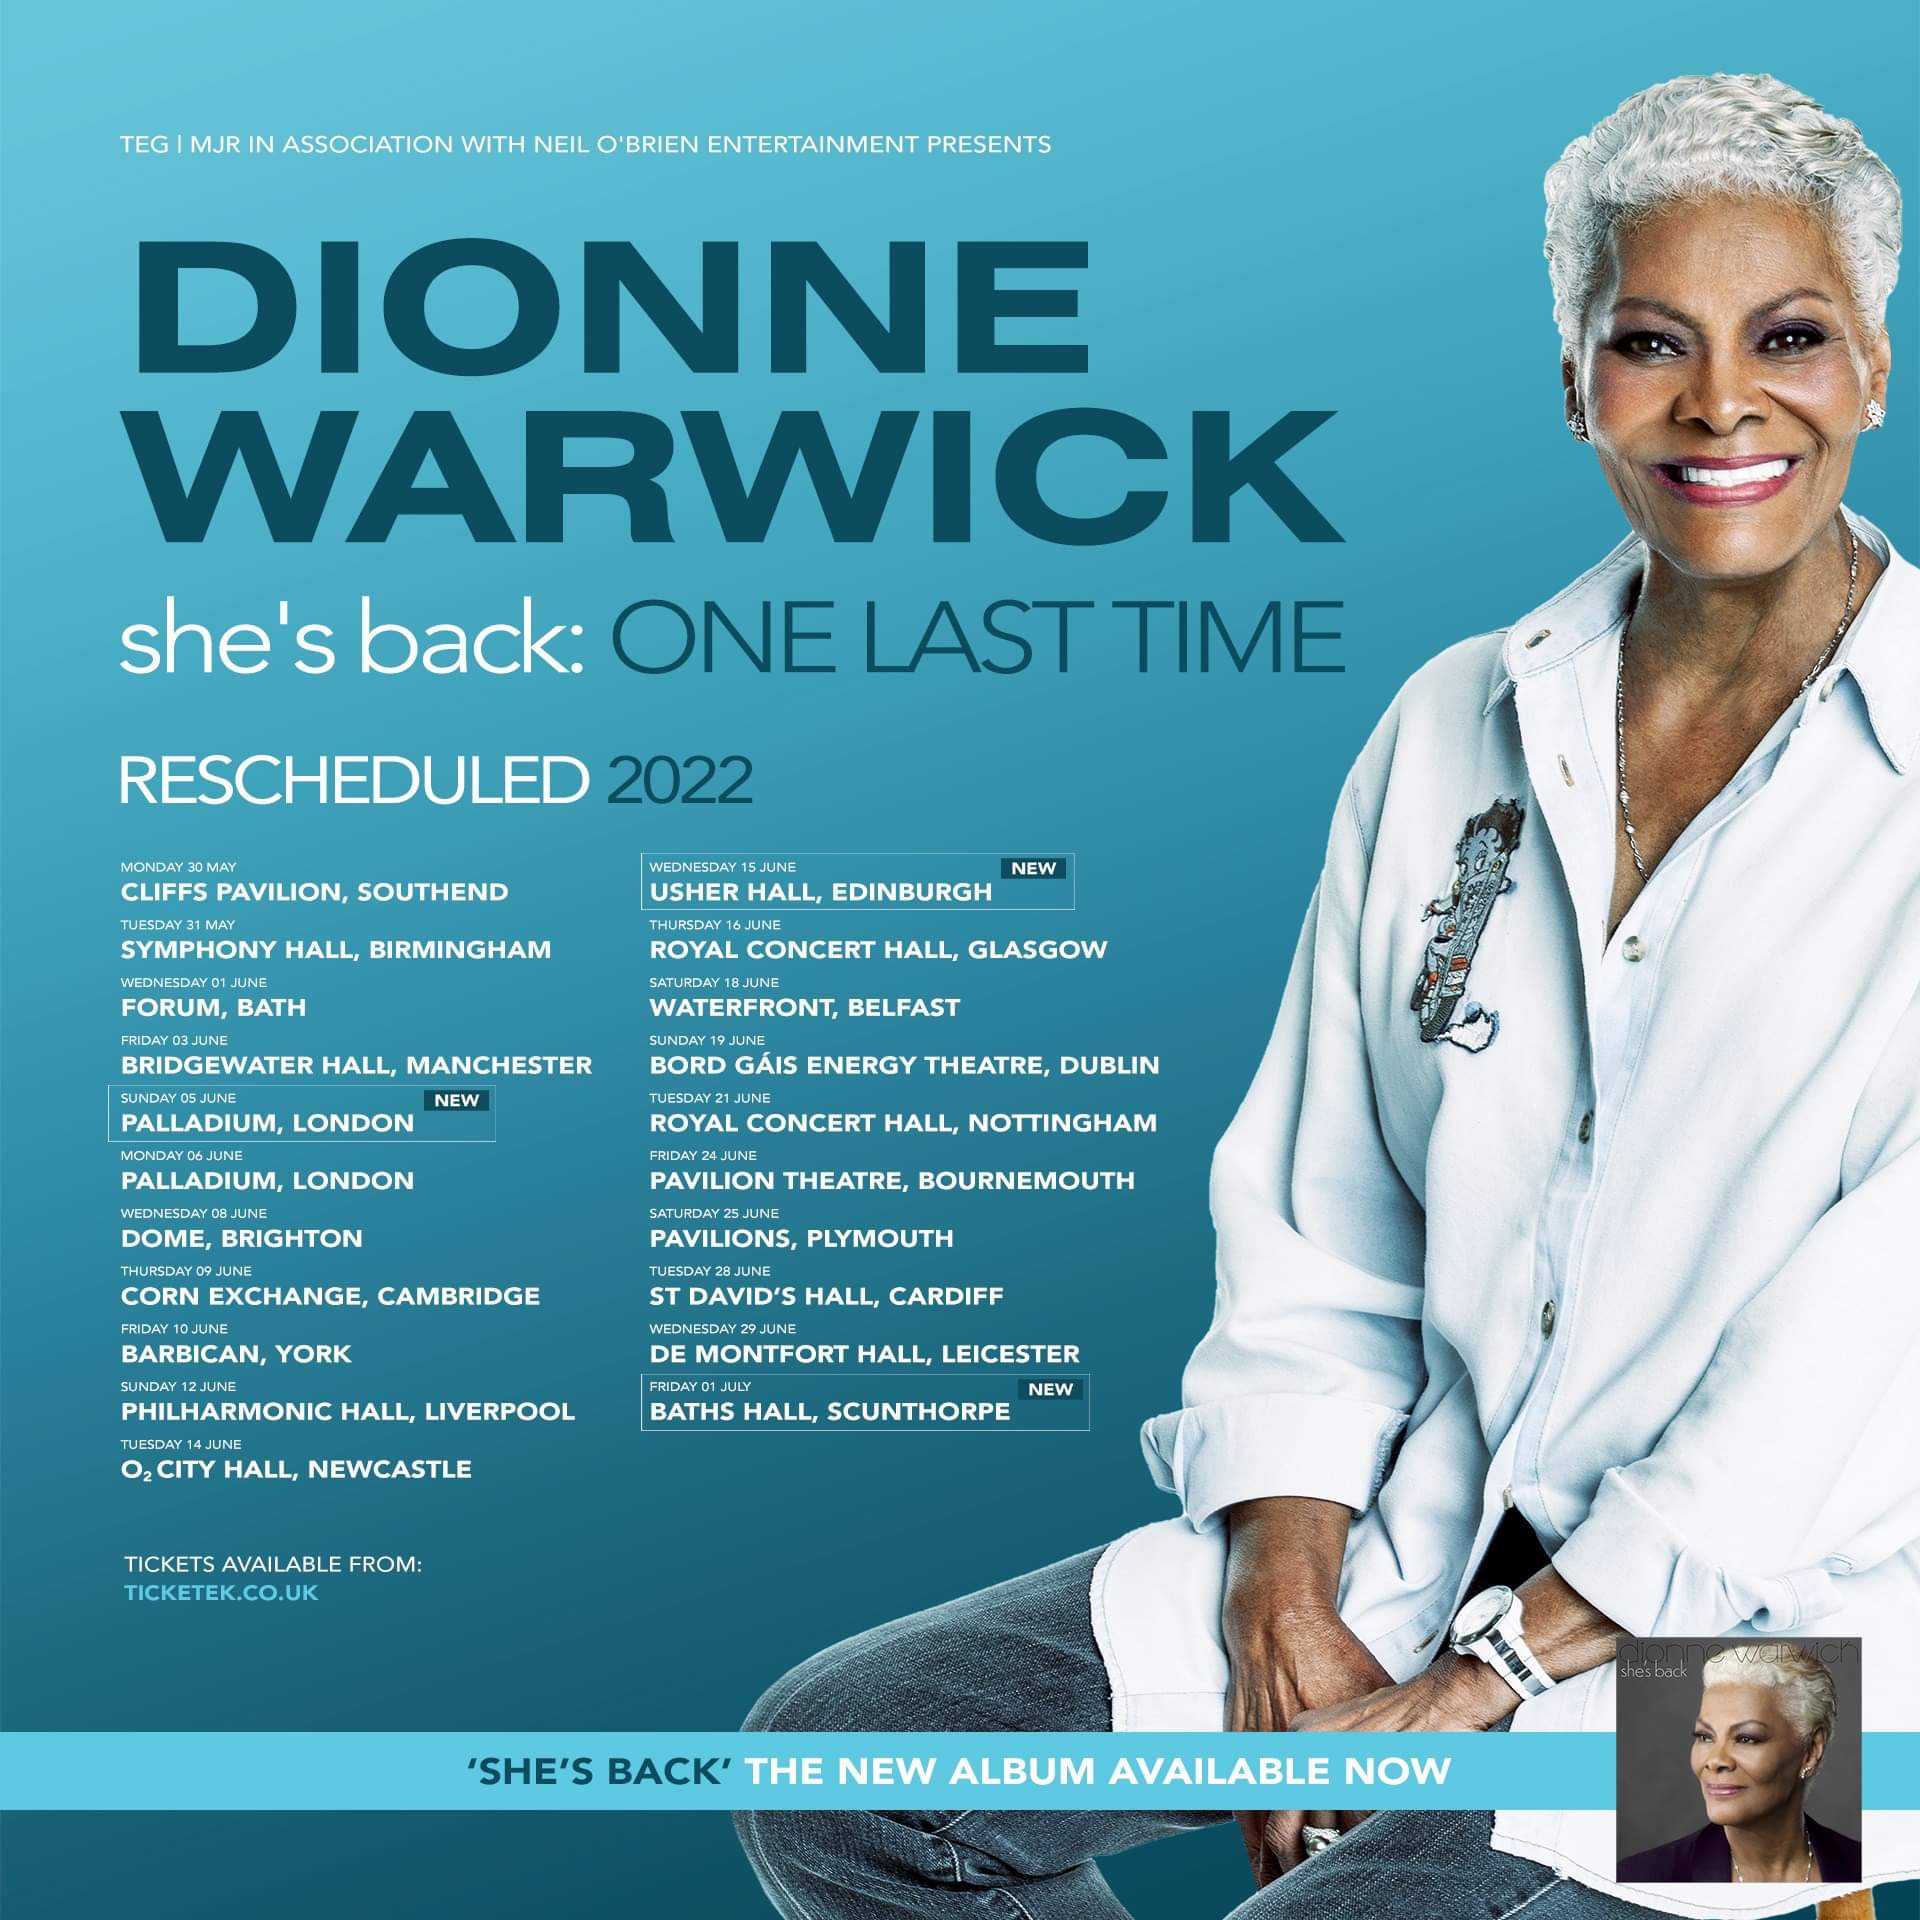 Dionne Warwick at the London Palladium (Review) The House That Soul Built